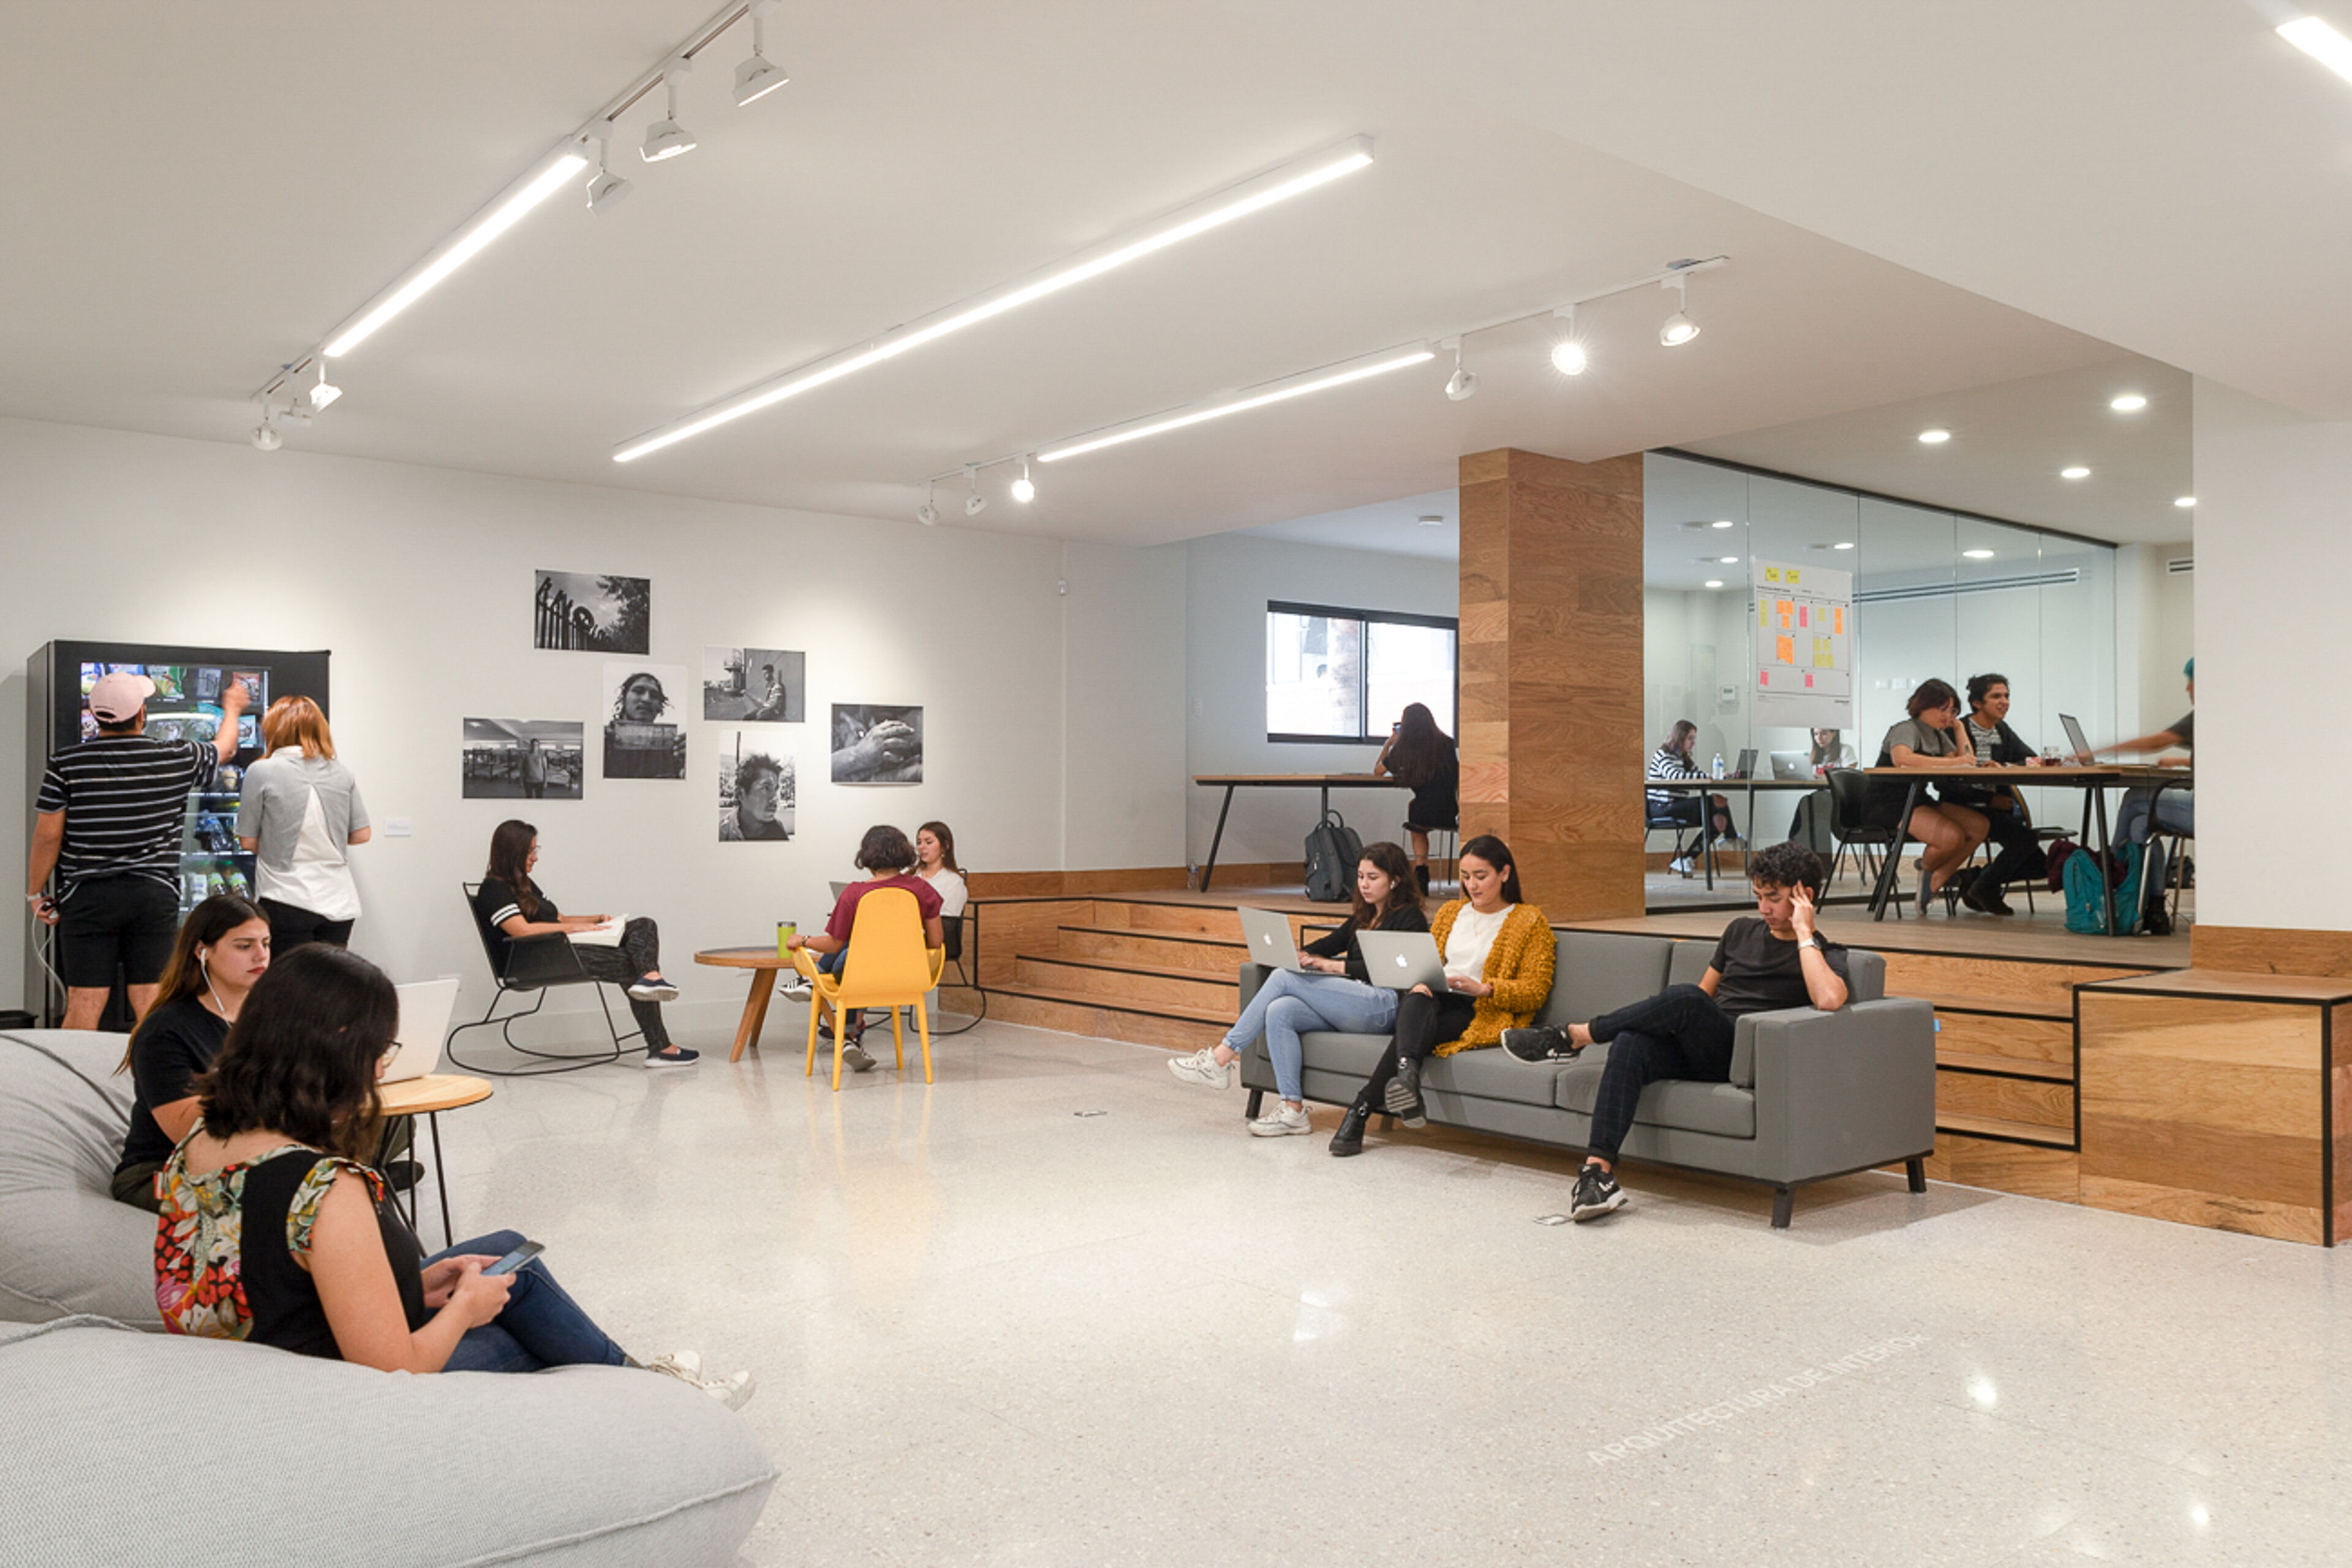 Students and professionals engage in work and discussion in a bright, modern communal space.